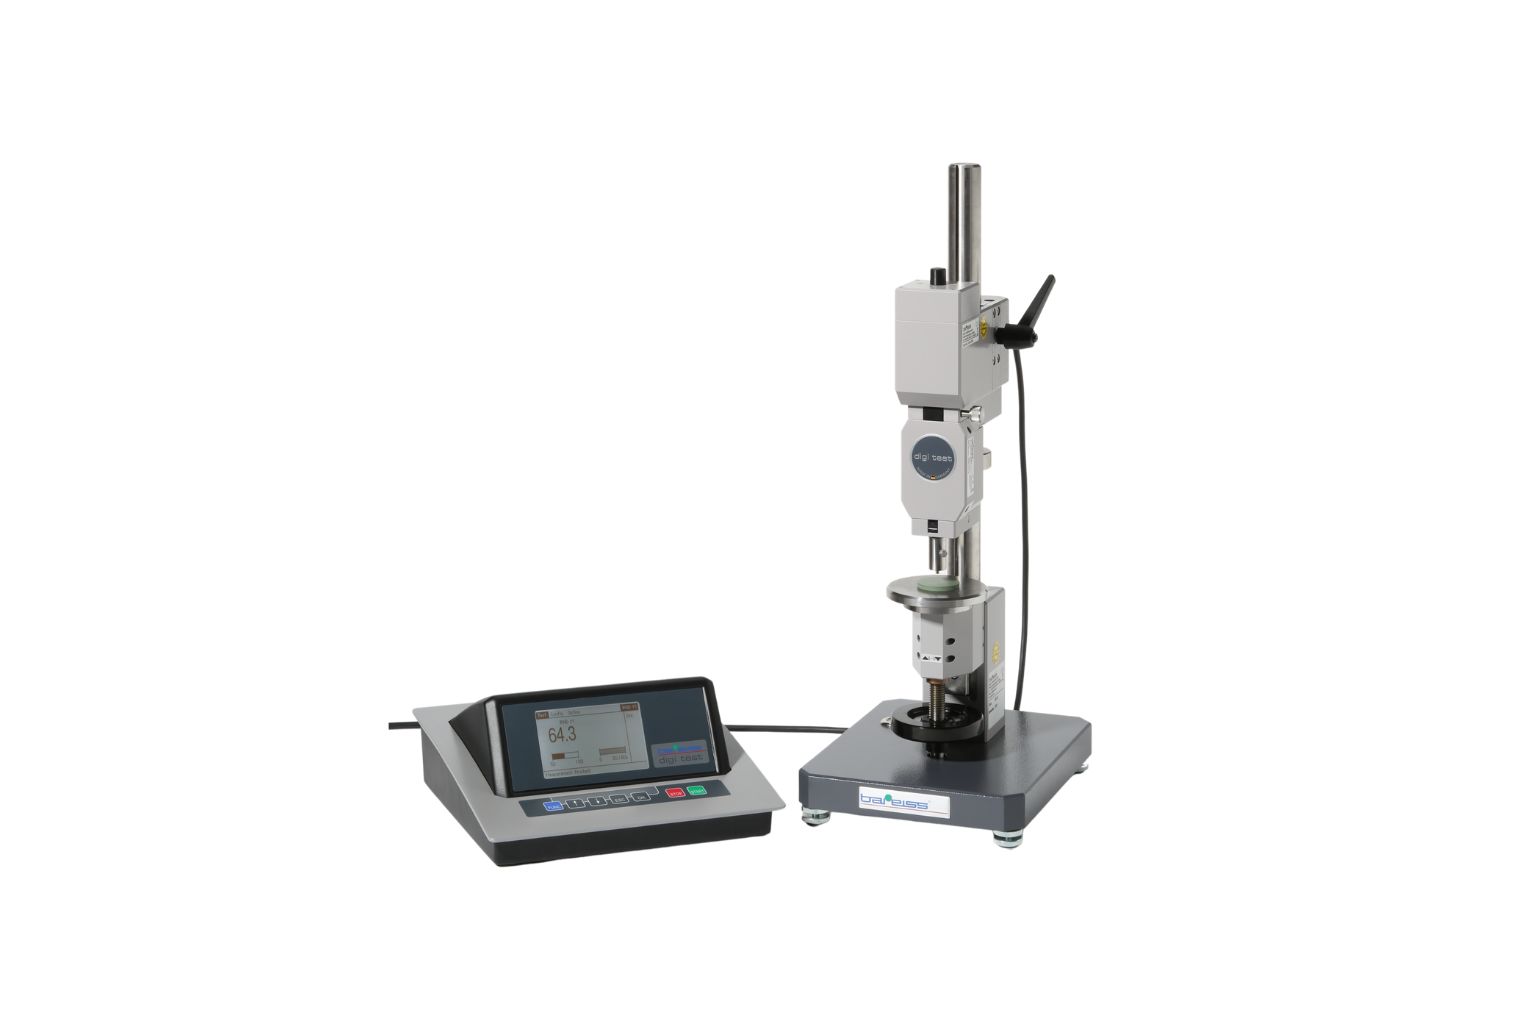 Digi Test II is a automated hardness testing device